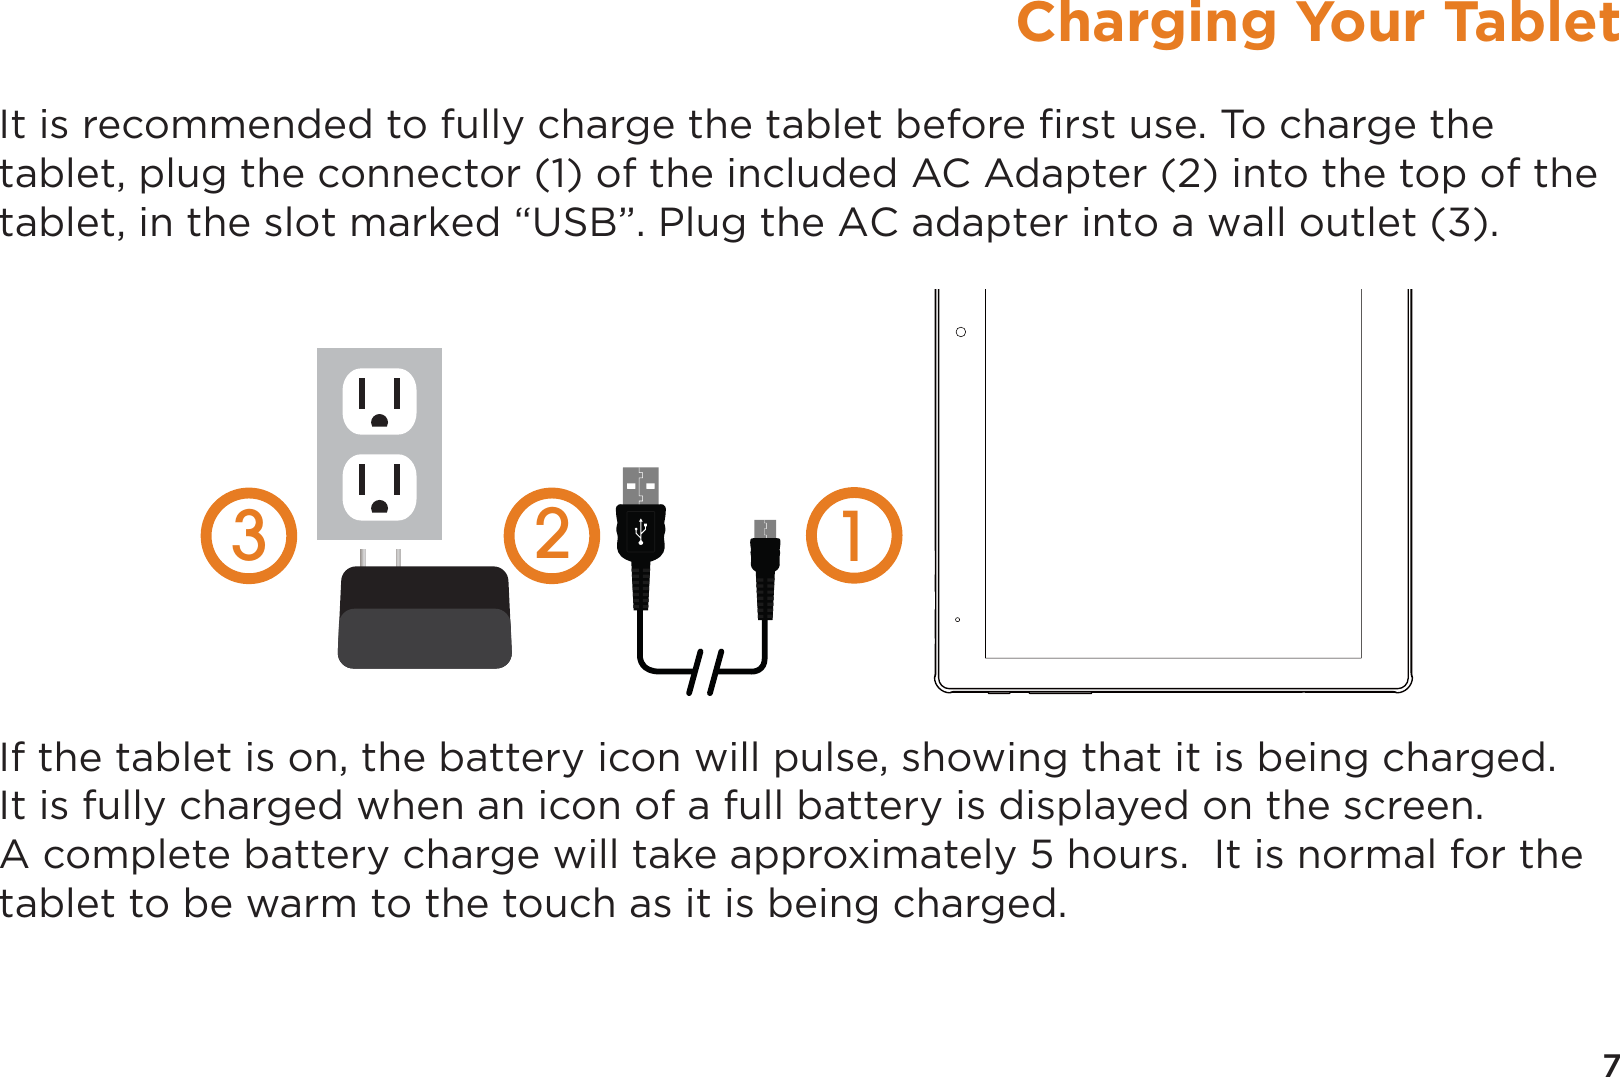 7Charging Your TabletIt is recommended to fully charge the tablet before ﬁrst use. To charge the tablet, plug the connector (1) of the included AC Adapter (2) into the top of the tablet, in the slot marked “USB”. Plug the AC adapter into a wall outlet (3).  If the tablet is on, the battery icon will pulse, showing that it is being charged.  It is fully charged when an icon of a full battery is displayed on the screen. A complete battery charge will take approximately 5 hours.  It is normal for the tablet to be warm to the touch as it is being charged.  123